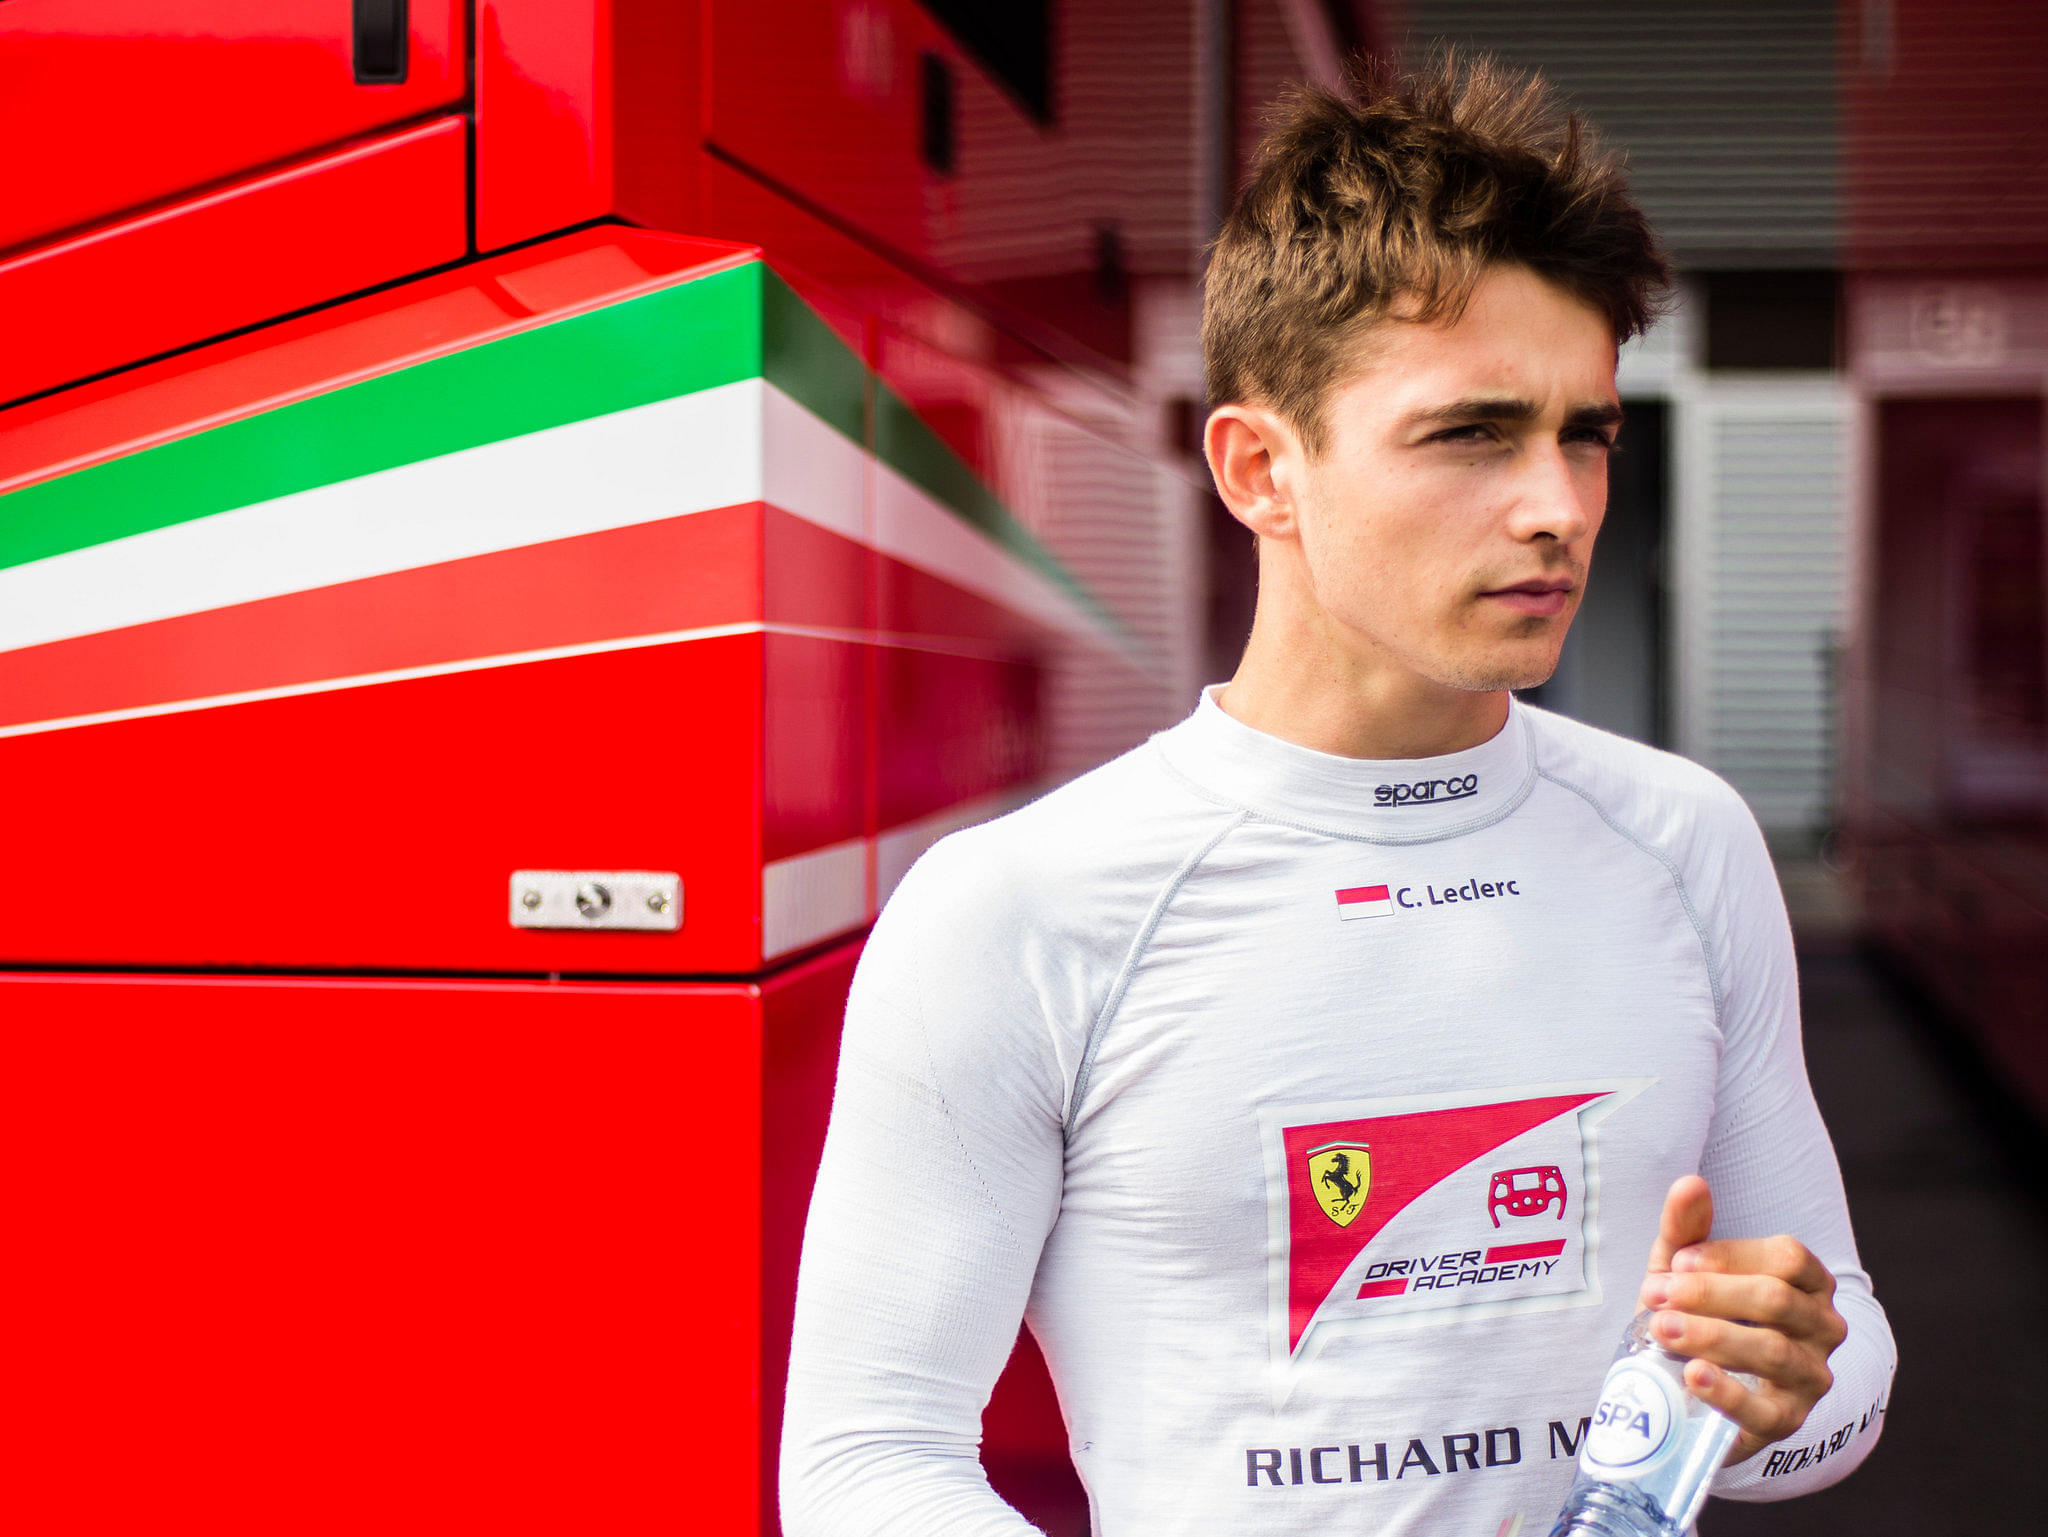 "It was a tiring season" - Charles Leclerc relieved to see the end of the F1 2020 season